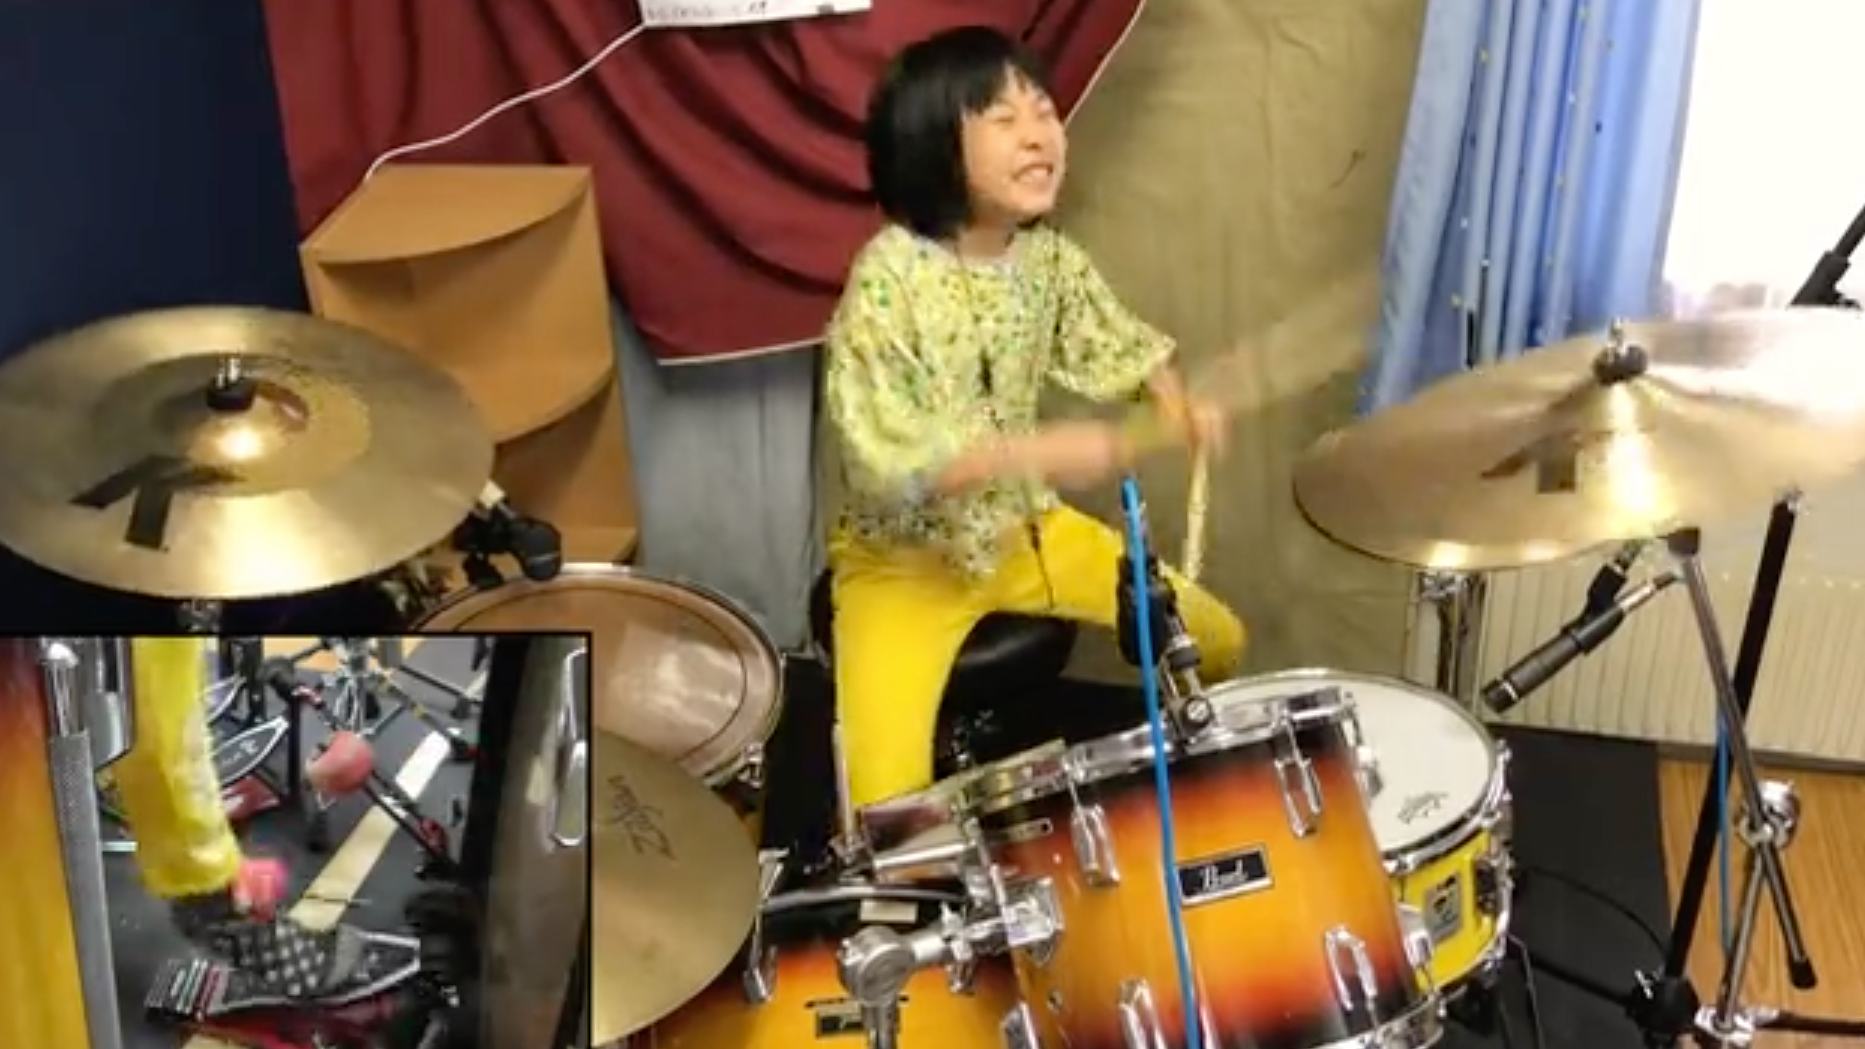 Daily Czabe: Adorable 8 Year Old Girl Slays Zepplin Riff on Drumset